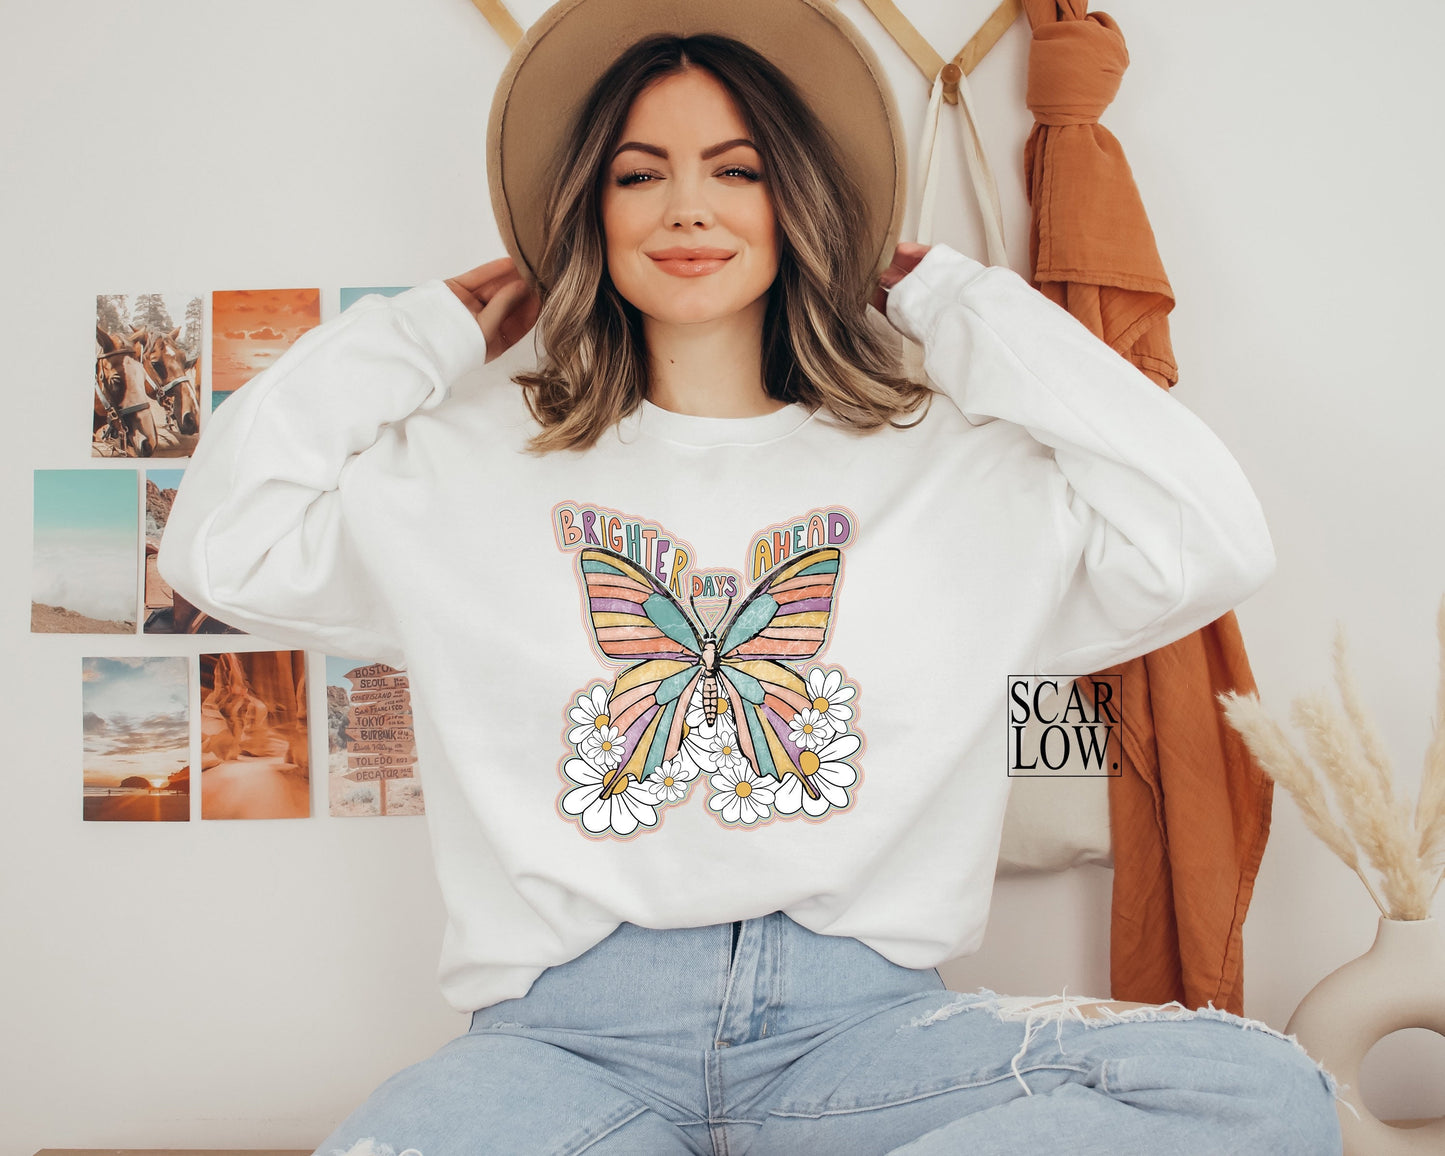 Brighter Days Ahead Floral Butterfly PNG sublimation design download, retro summer png, boho butterfly png, inspirational png, retro png